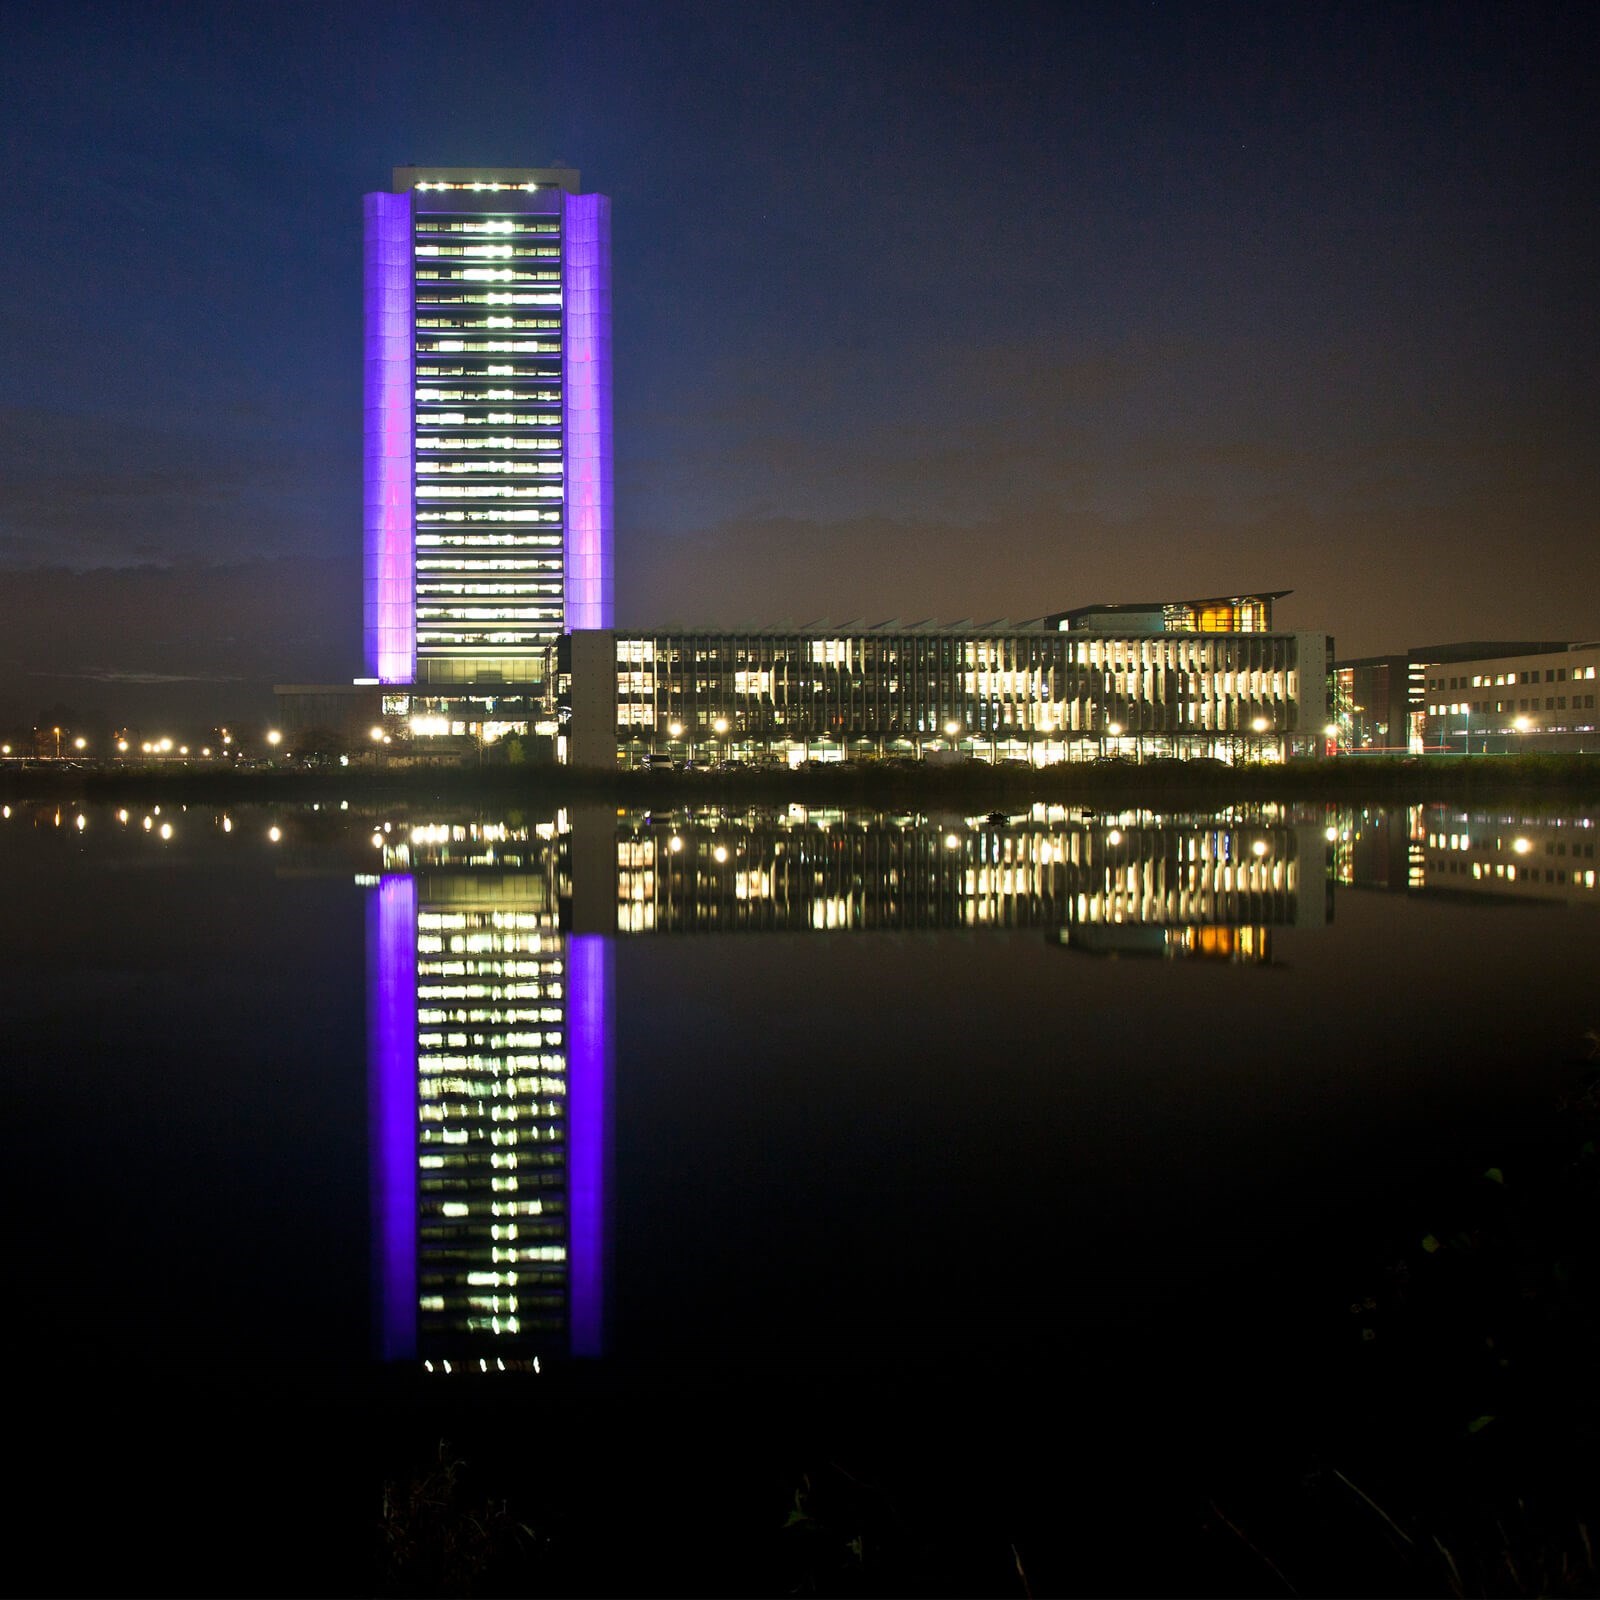 Province of Noord-Brabant office